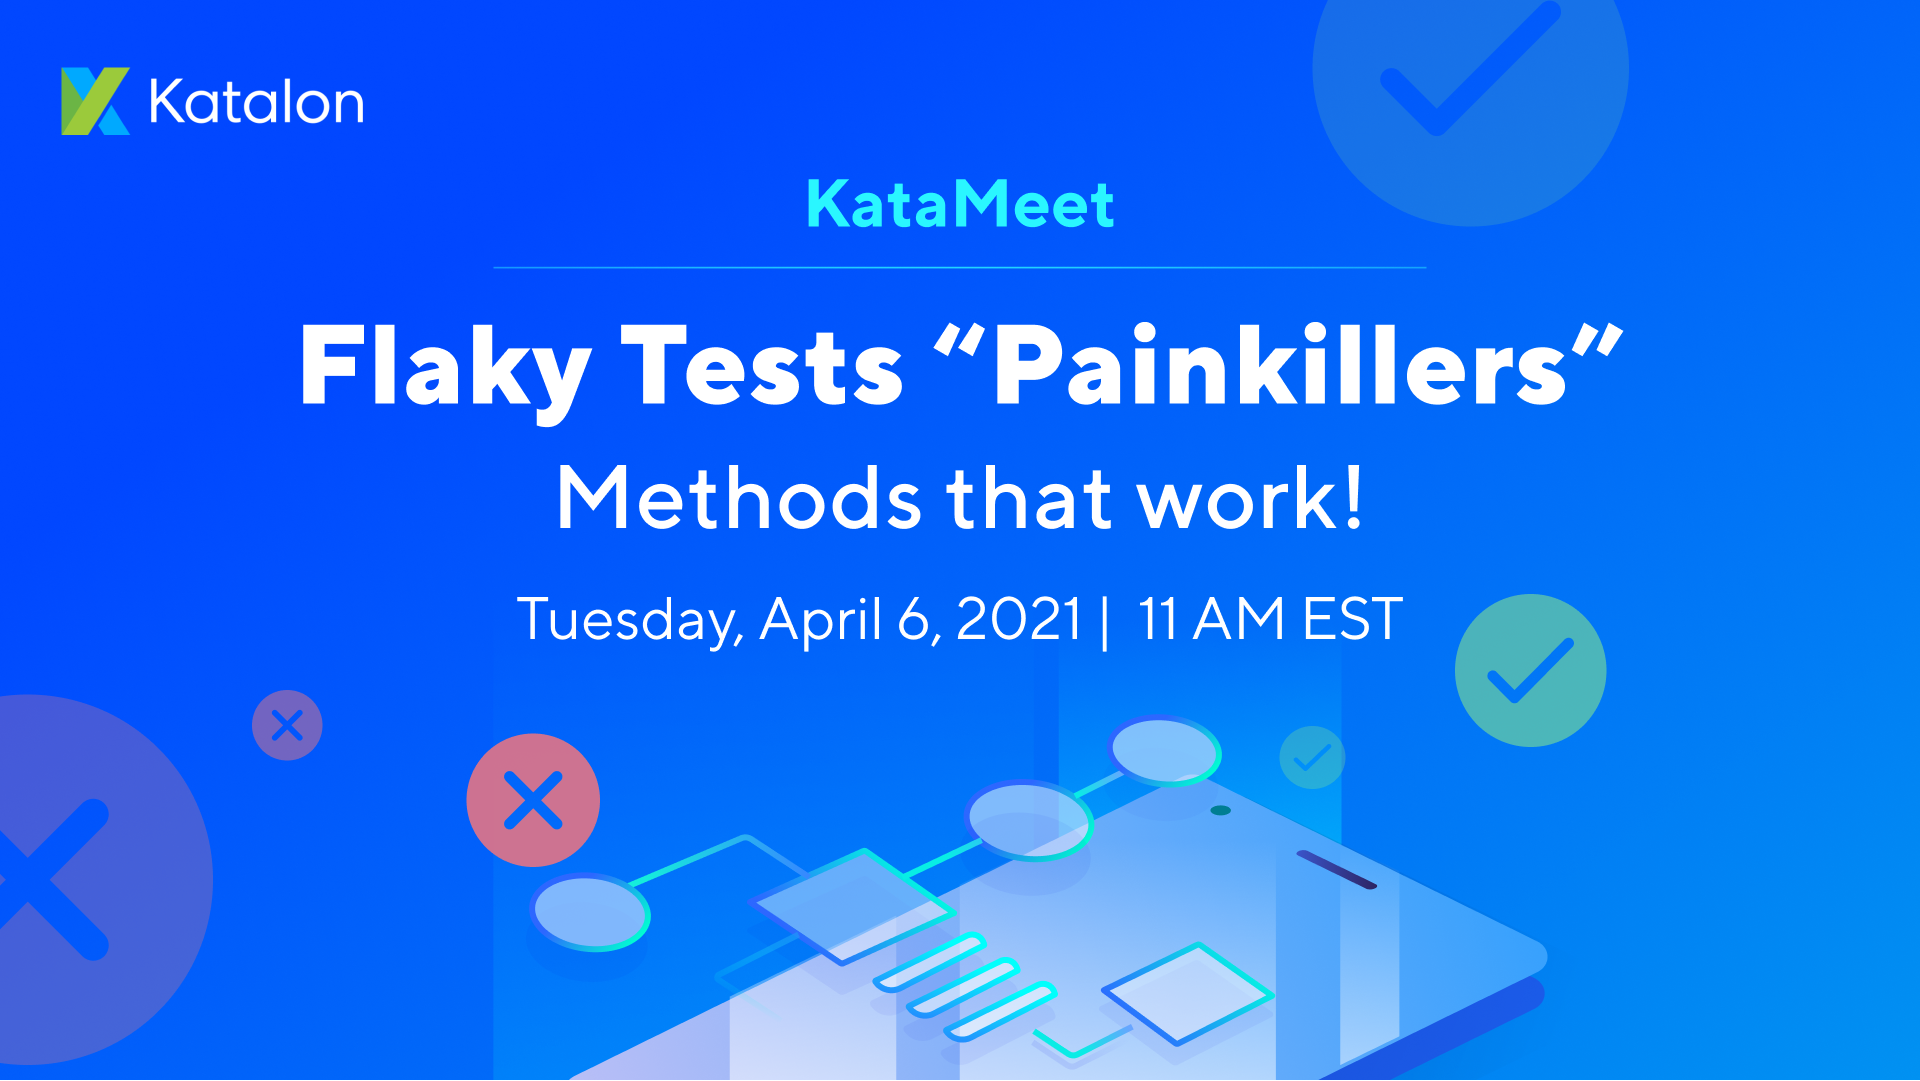 Flaky Tests “Painkillers” – Methods that work!